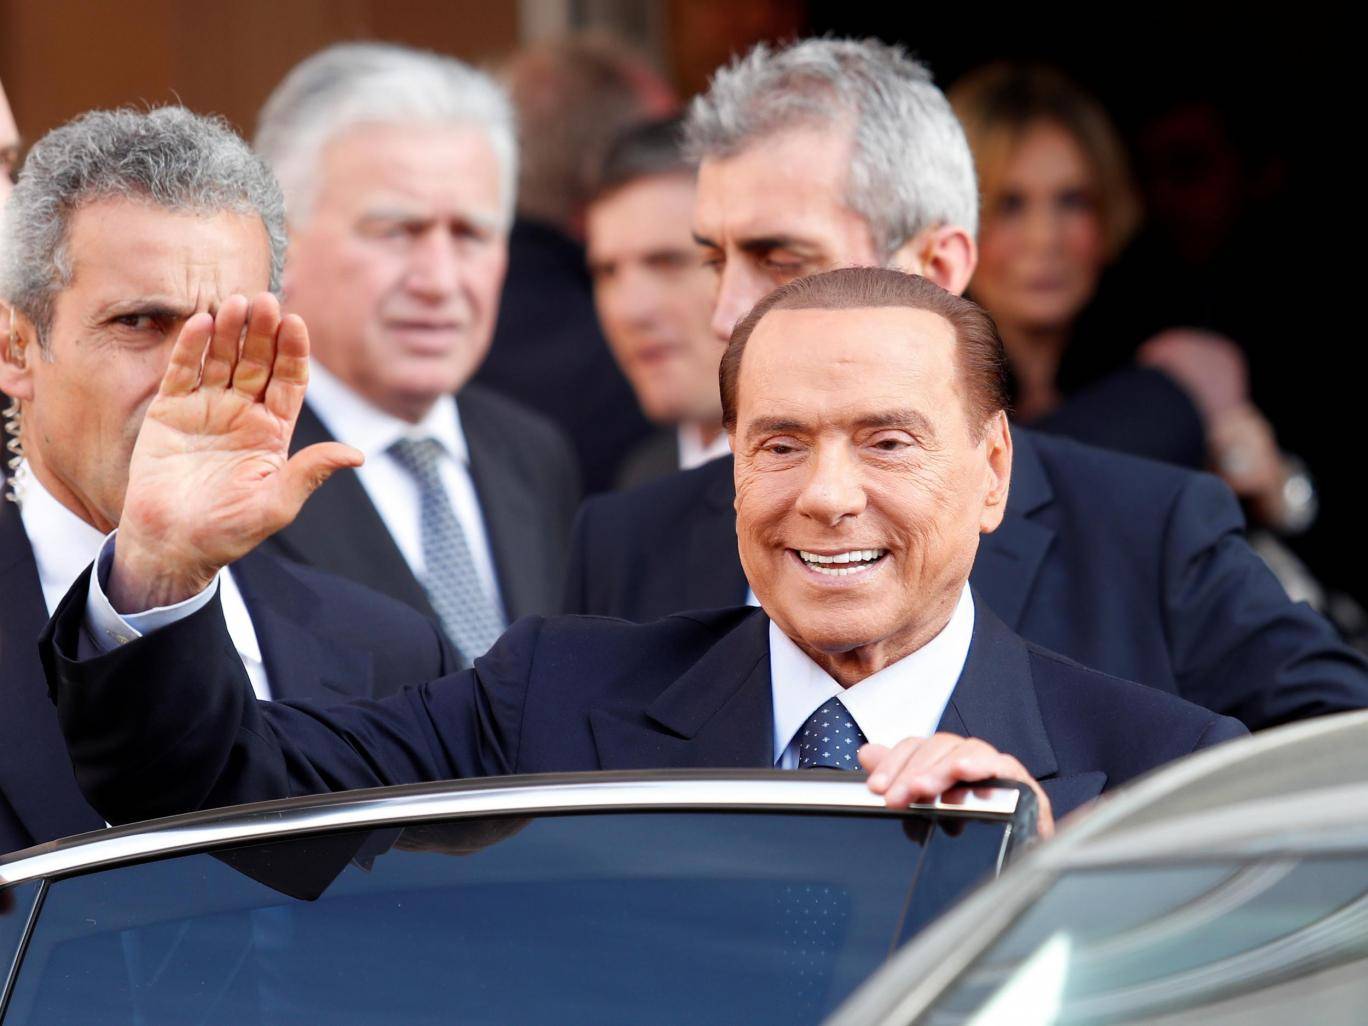 Berlusconi's plans to deport 600,000 migrants impossible, take 15 years, say experts